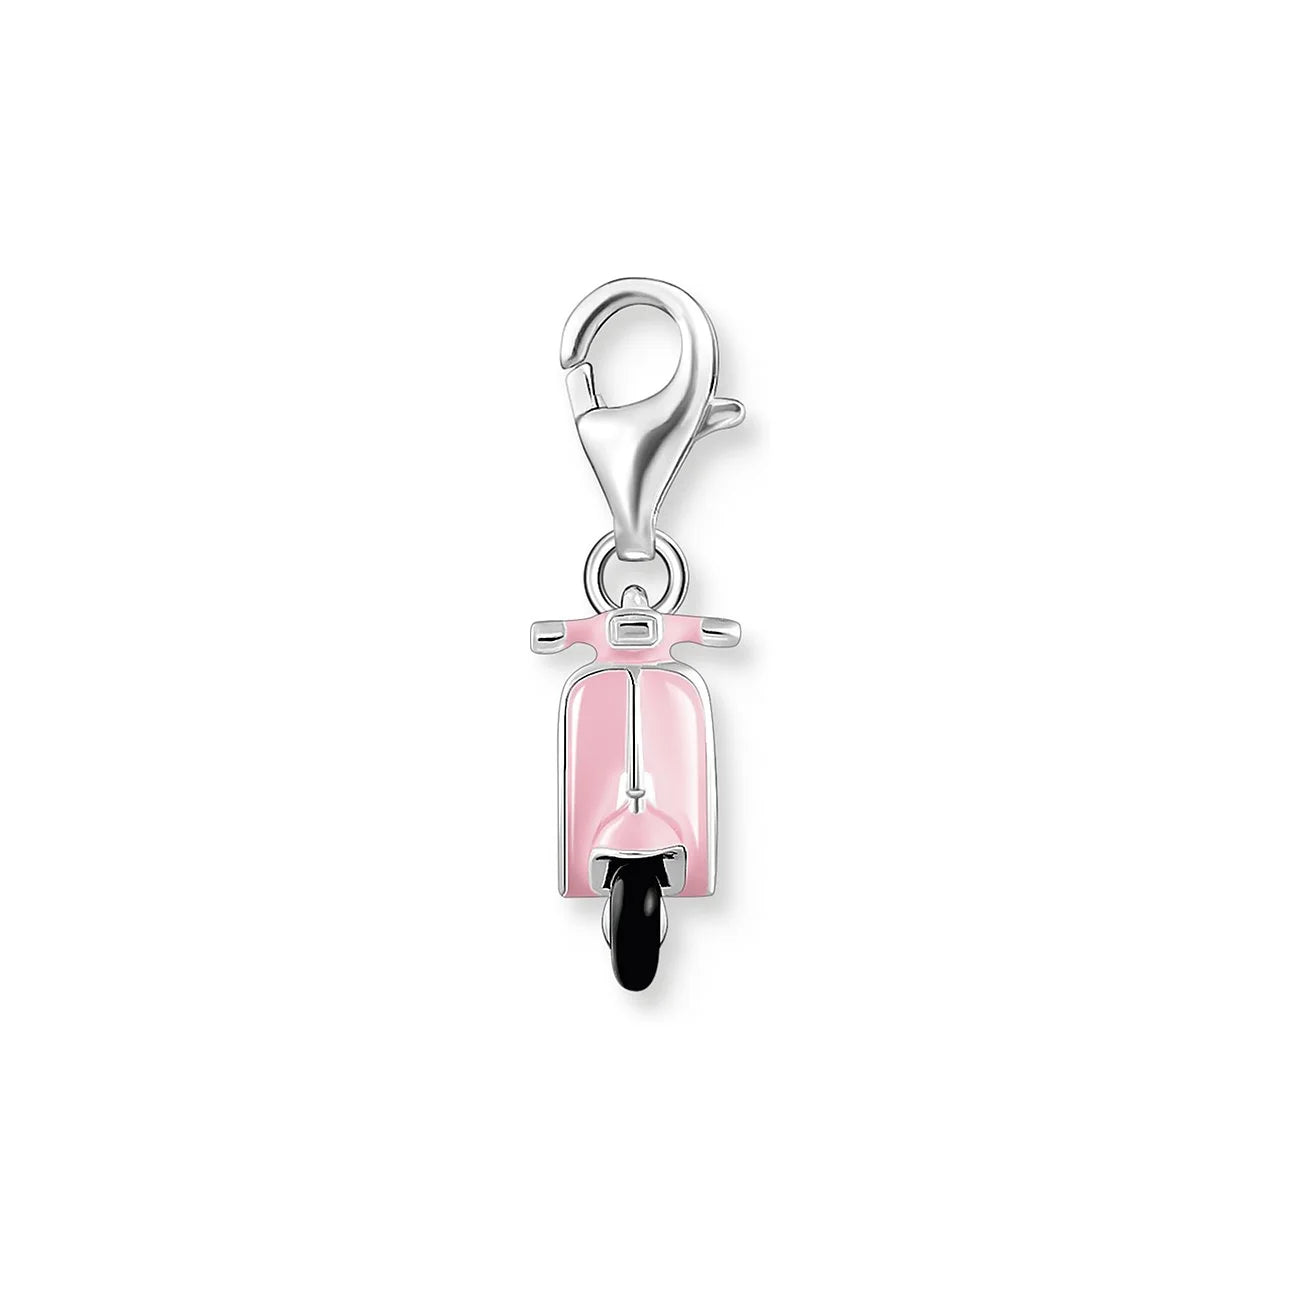 Thomas Sabo Charm-Anhänger Rosa Emaille-Roller - 1992-007-9